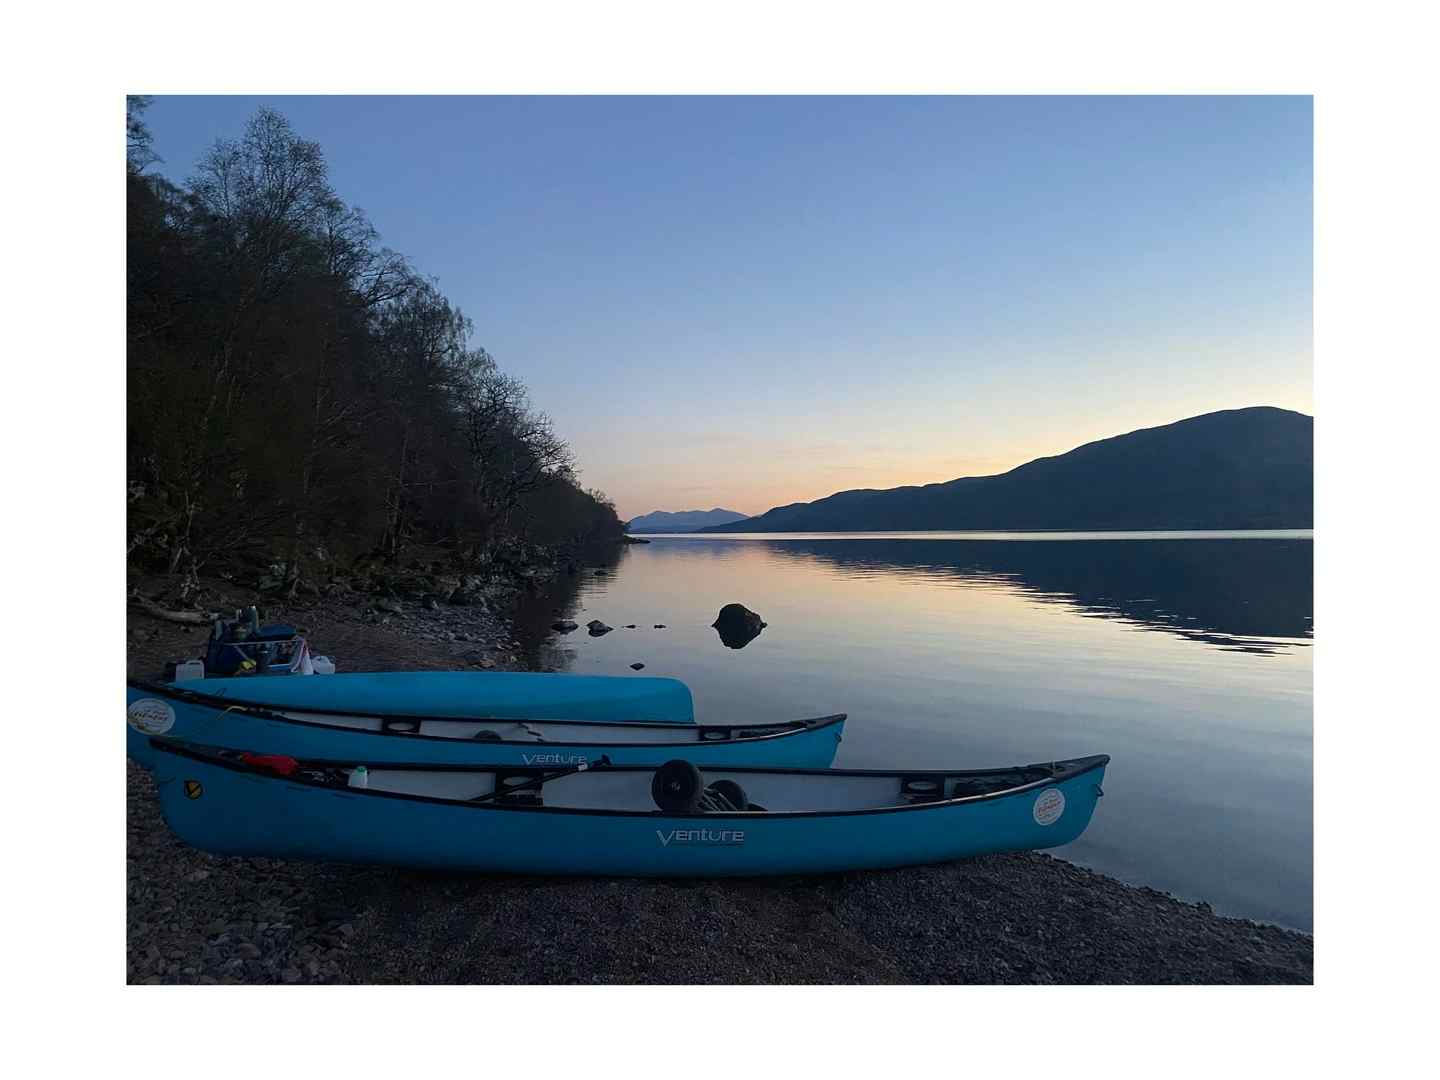 Our canoe trip along the Great Glen way cou...